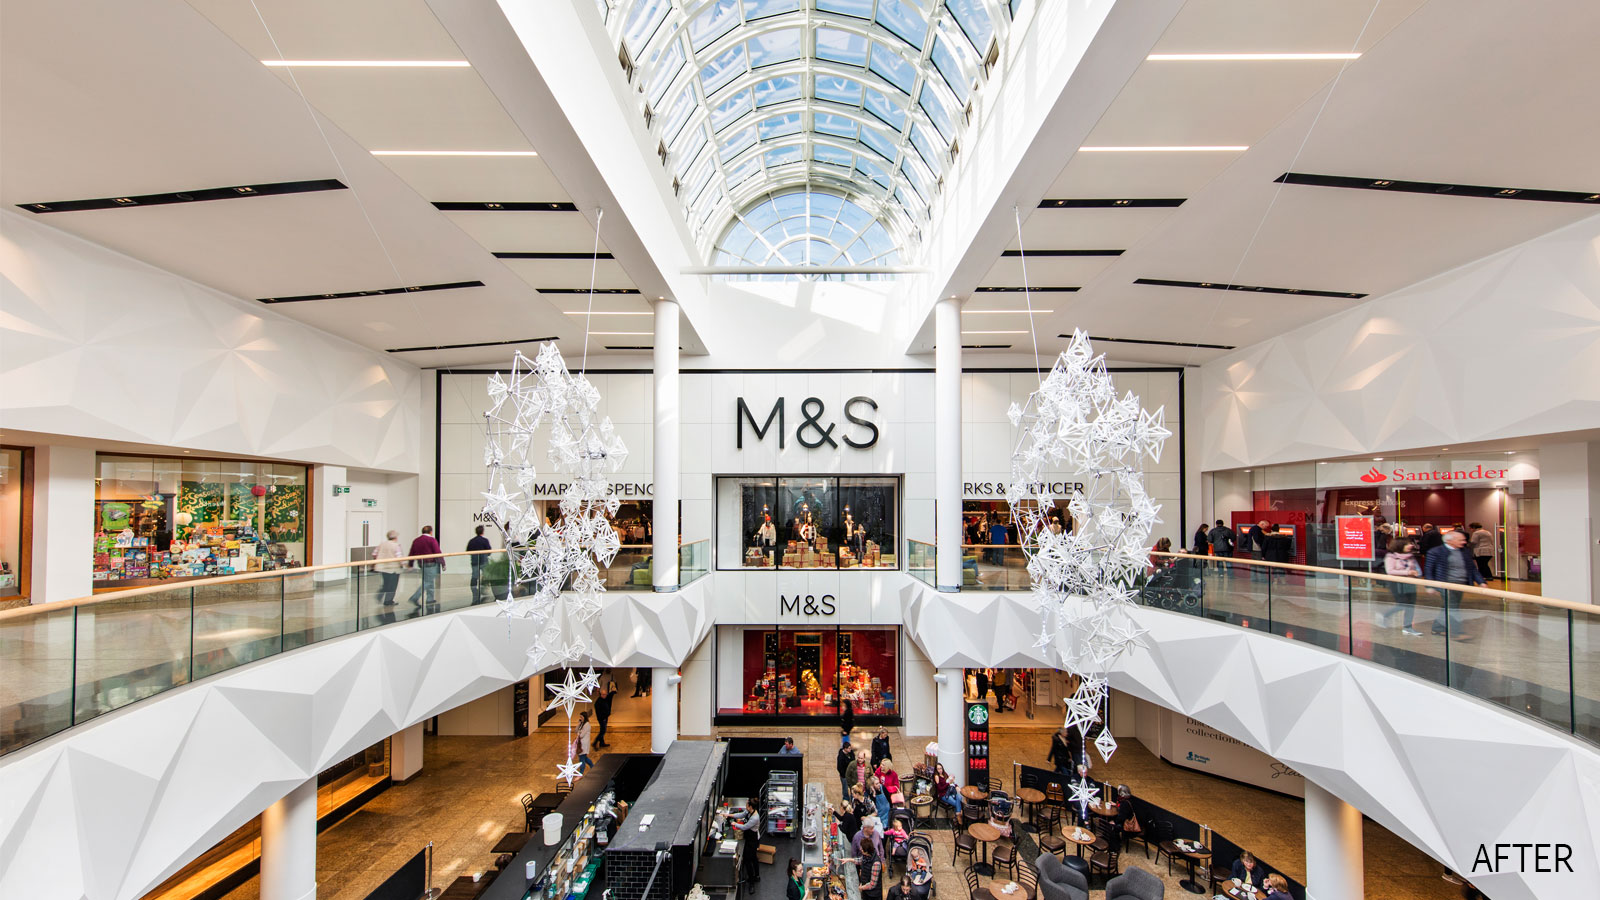 /globalassets/projects/meadowhall-refurbishment/aftermeadowhall_project-image-1600px-4.jpg